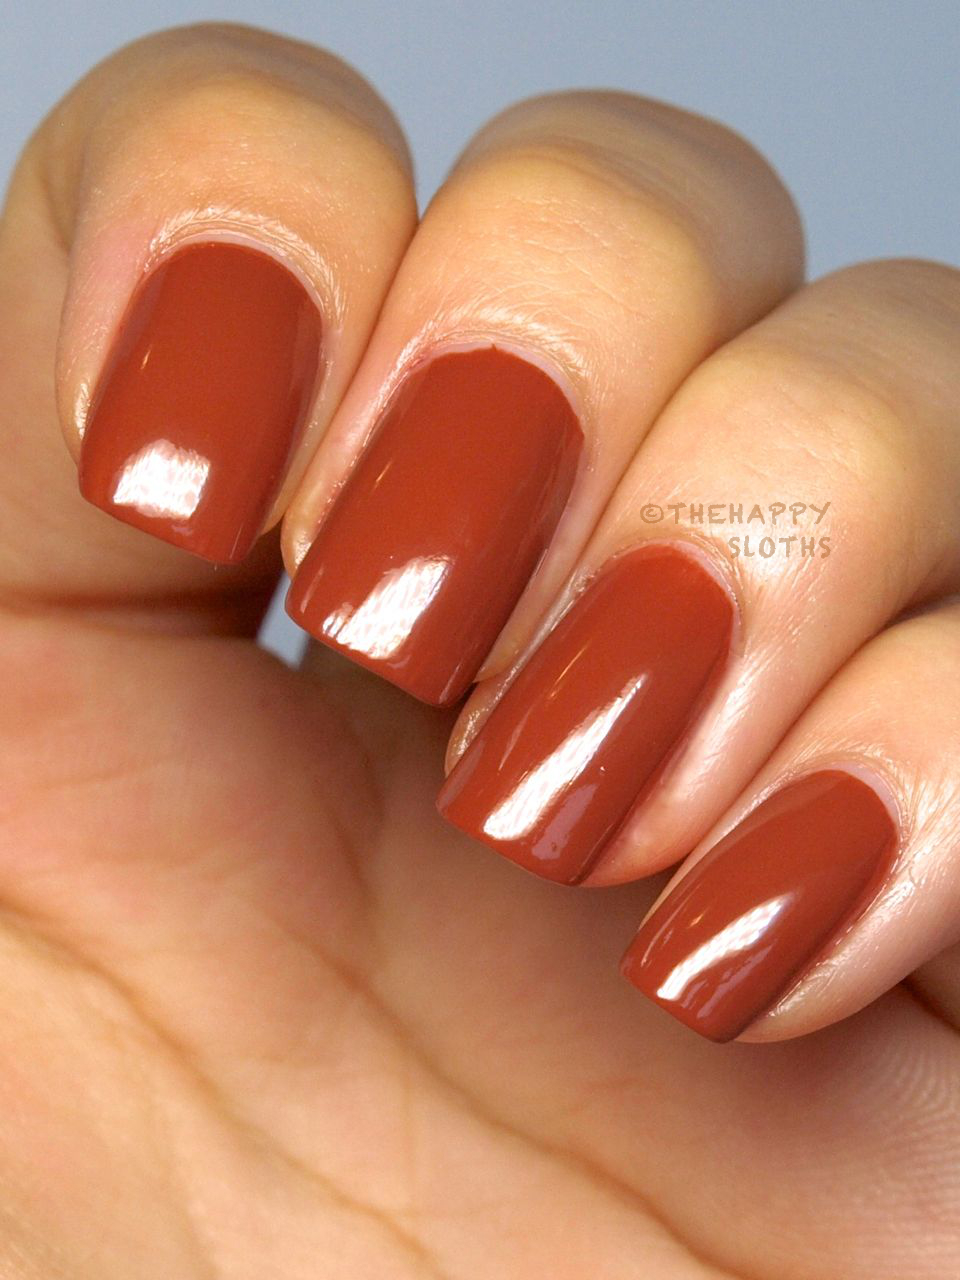 Sally Hansen Insta-Dri Moroccan Spice Market Collection Nail Polish in Moracc-go: Review and Swatches